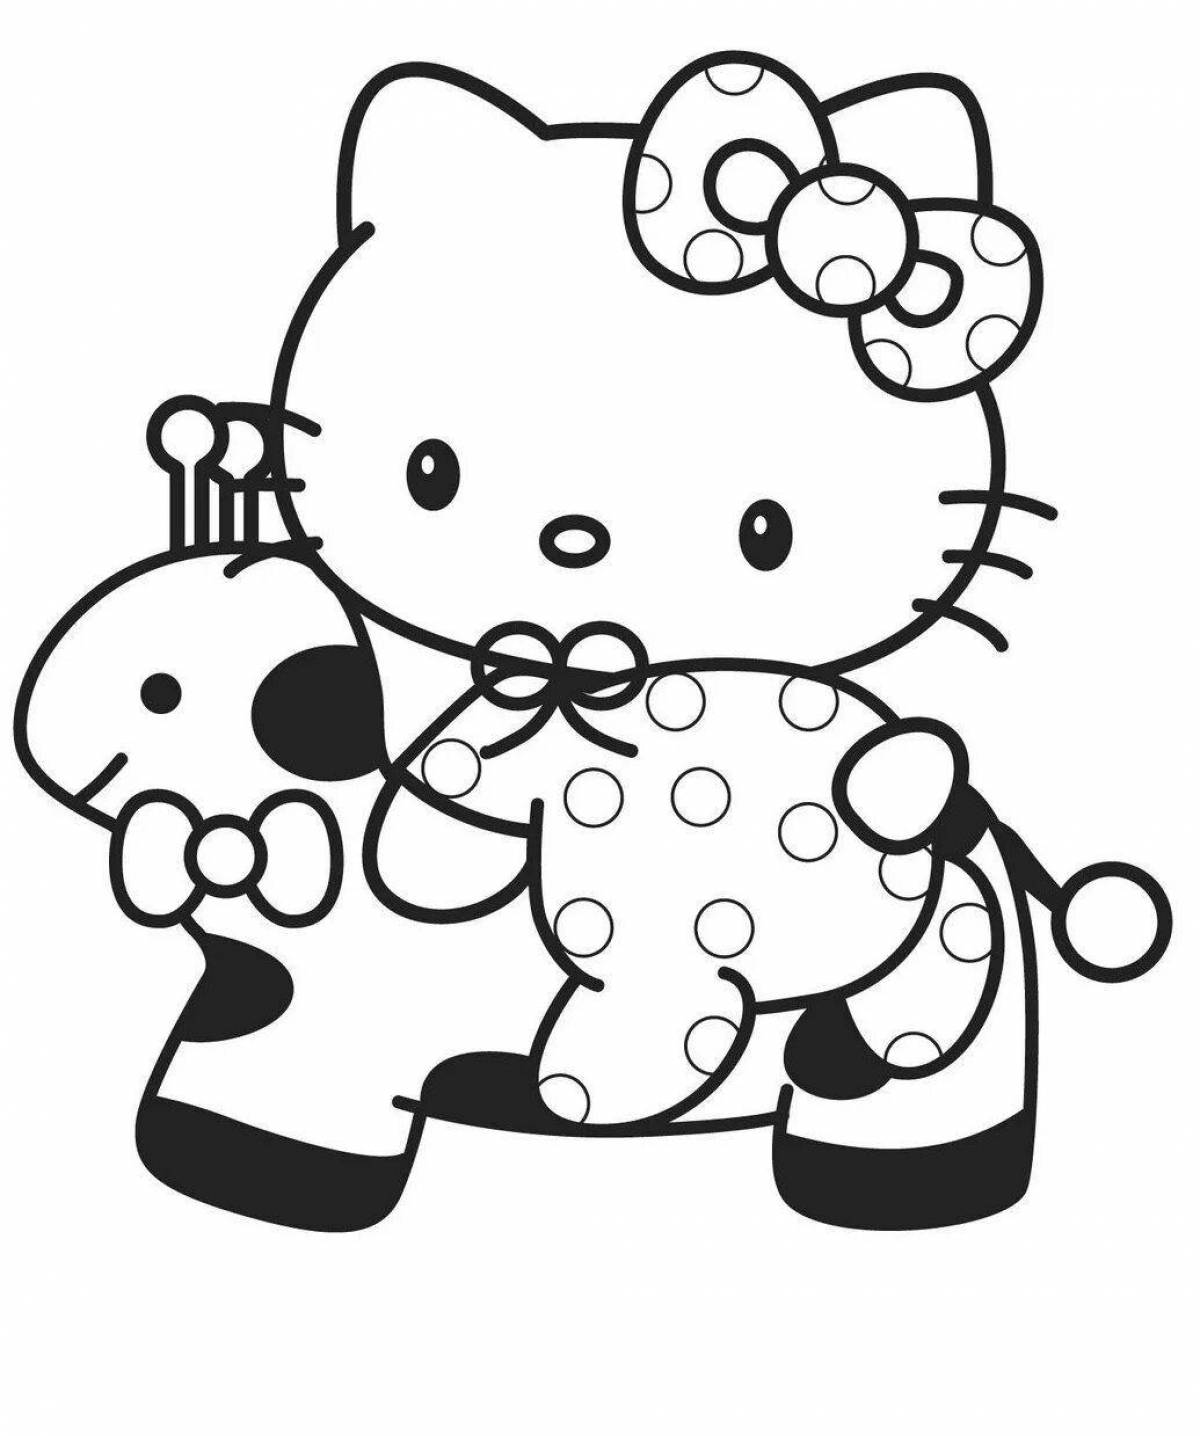 Large hello kitty coloring page